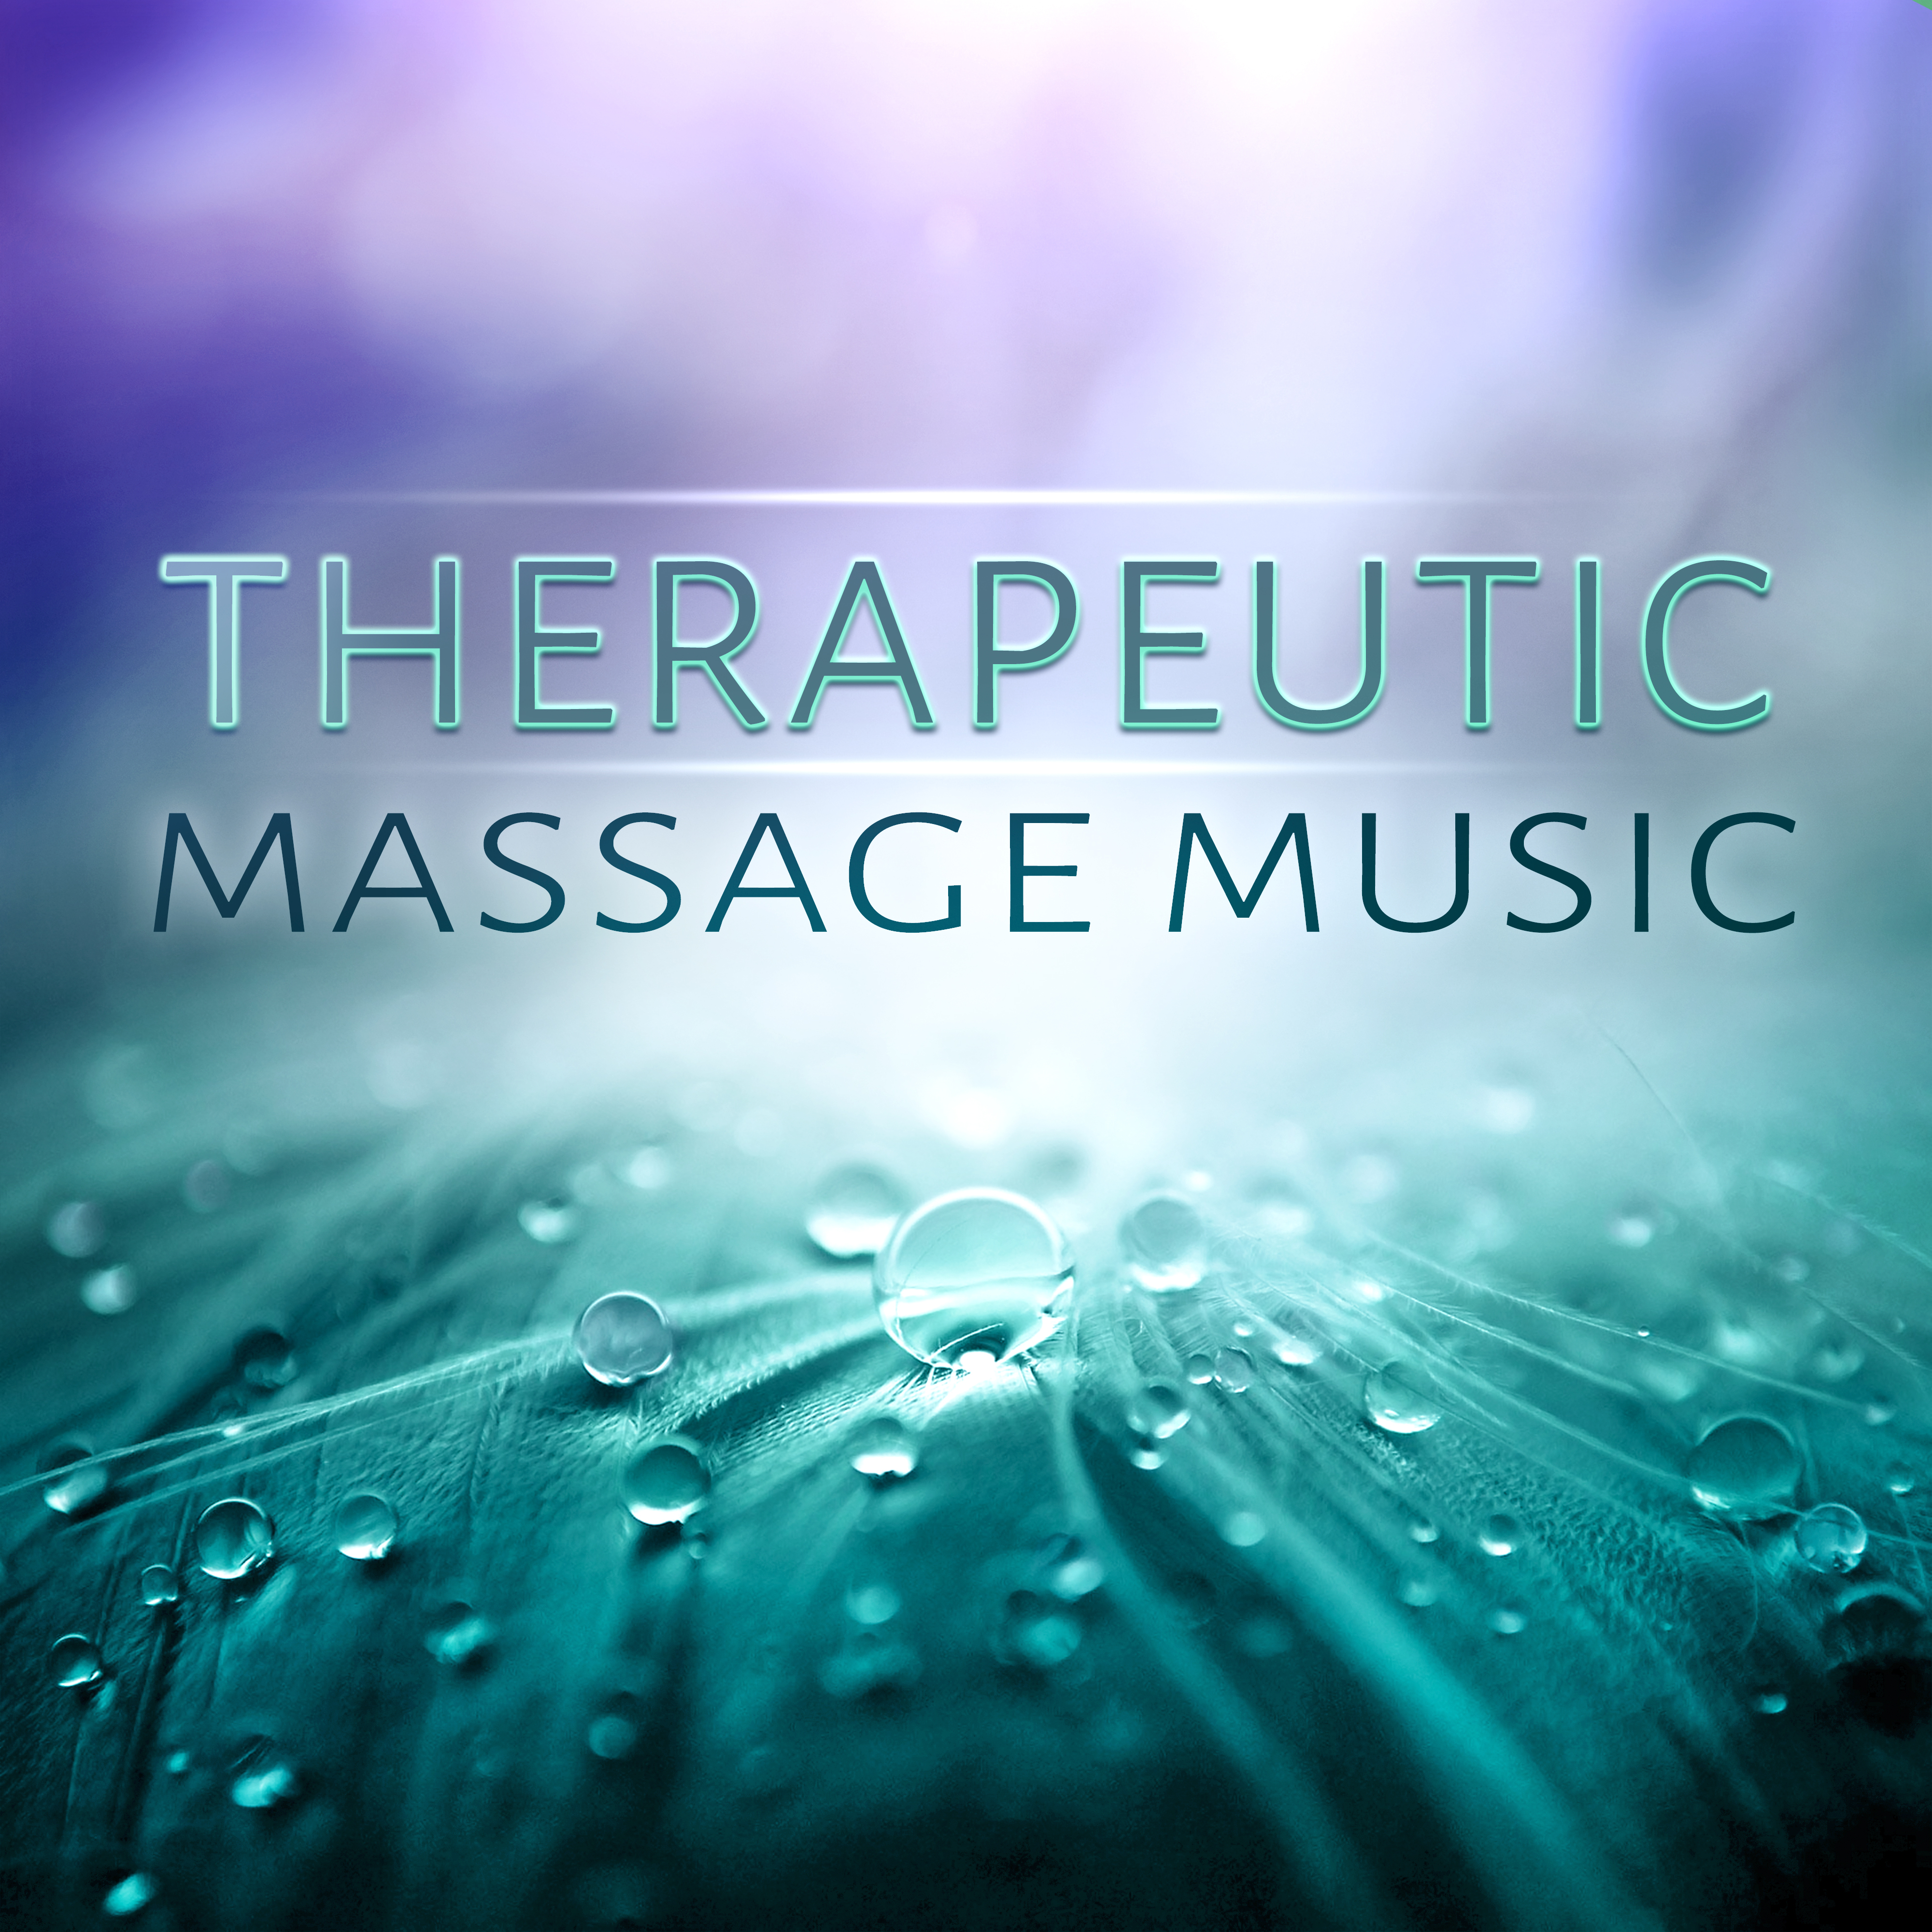 Therapeutic Massage Music - Serenity Relaxing Spa Music, Sound Therapy for Relaxation, Meditation with Sounds of Nature, Reiki Sound Healing